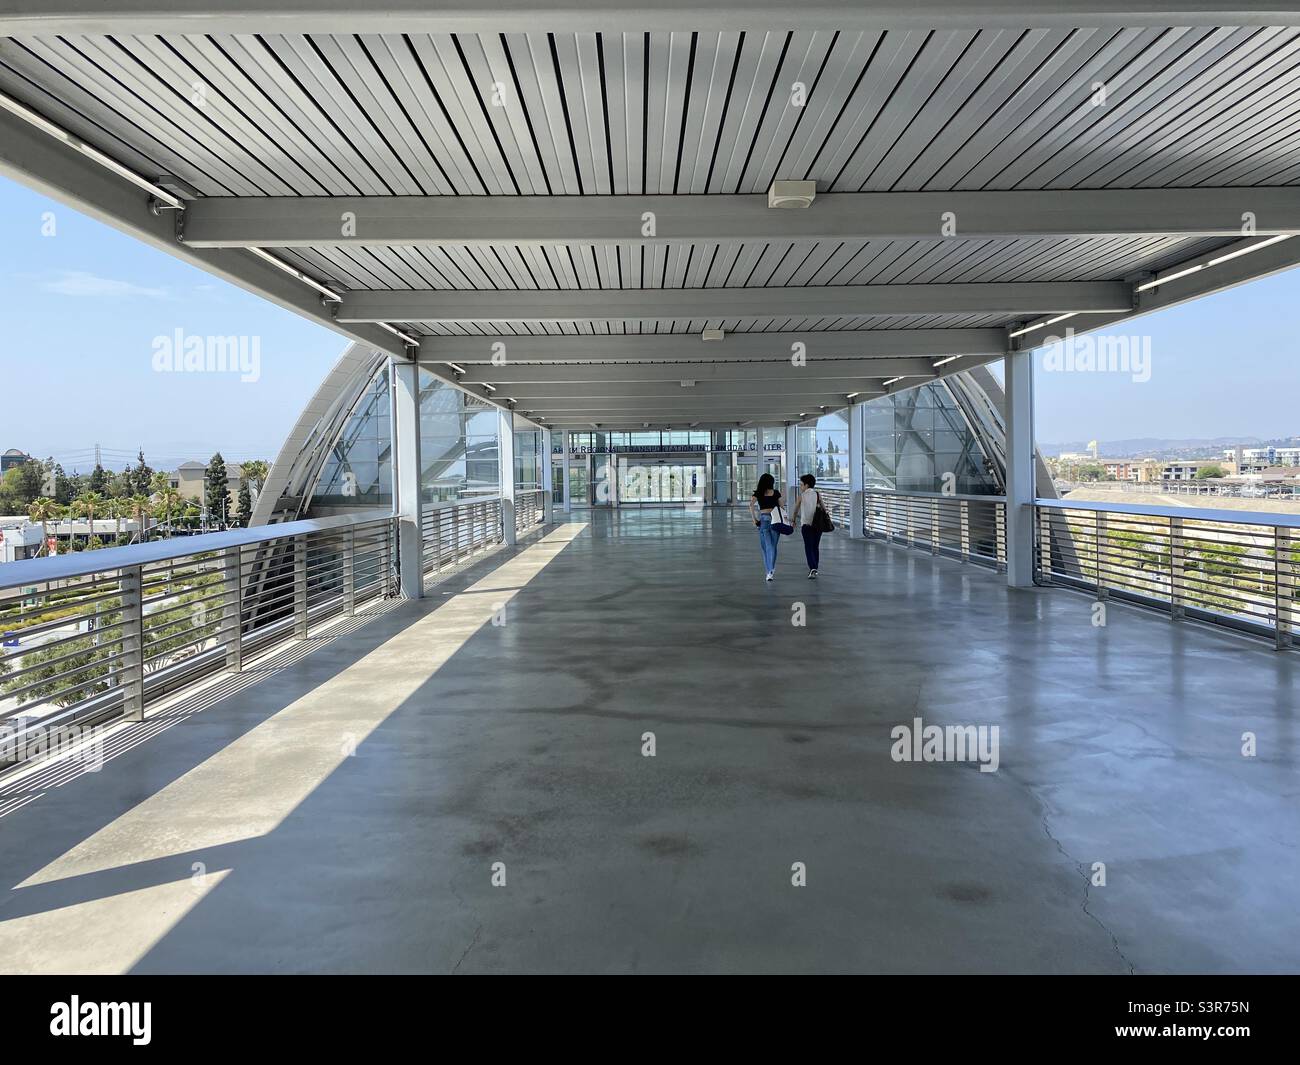 ANAHEIM, CA, JUL 2021: concourse with travelers walking to elevators at Anaheim Regional Transportation Center, links to buses, Metrolink and Amtrak trains Stock Photo